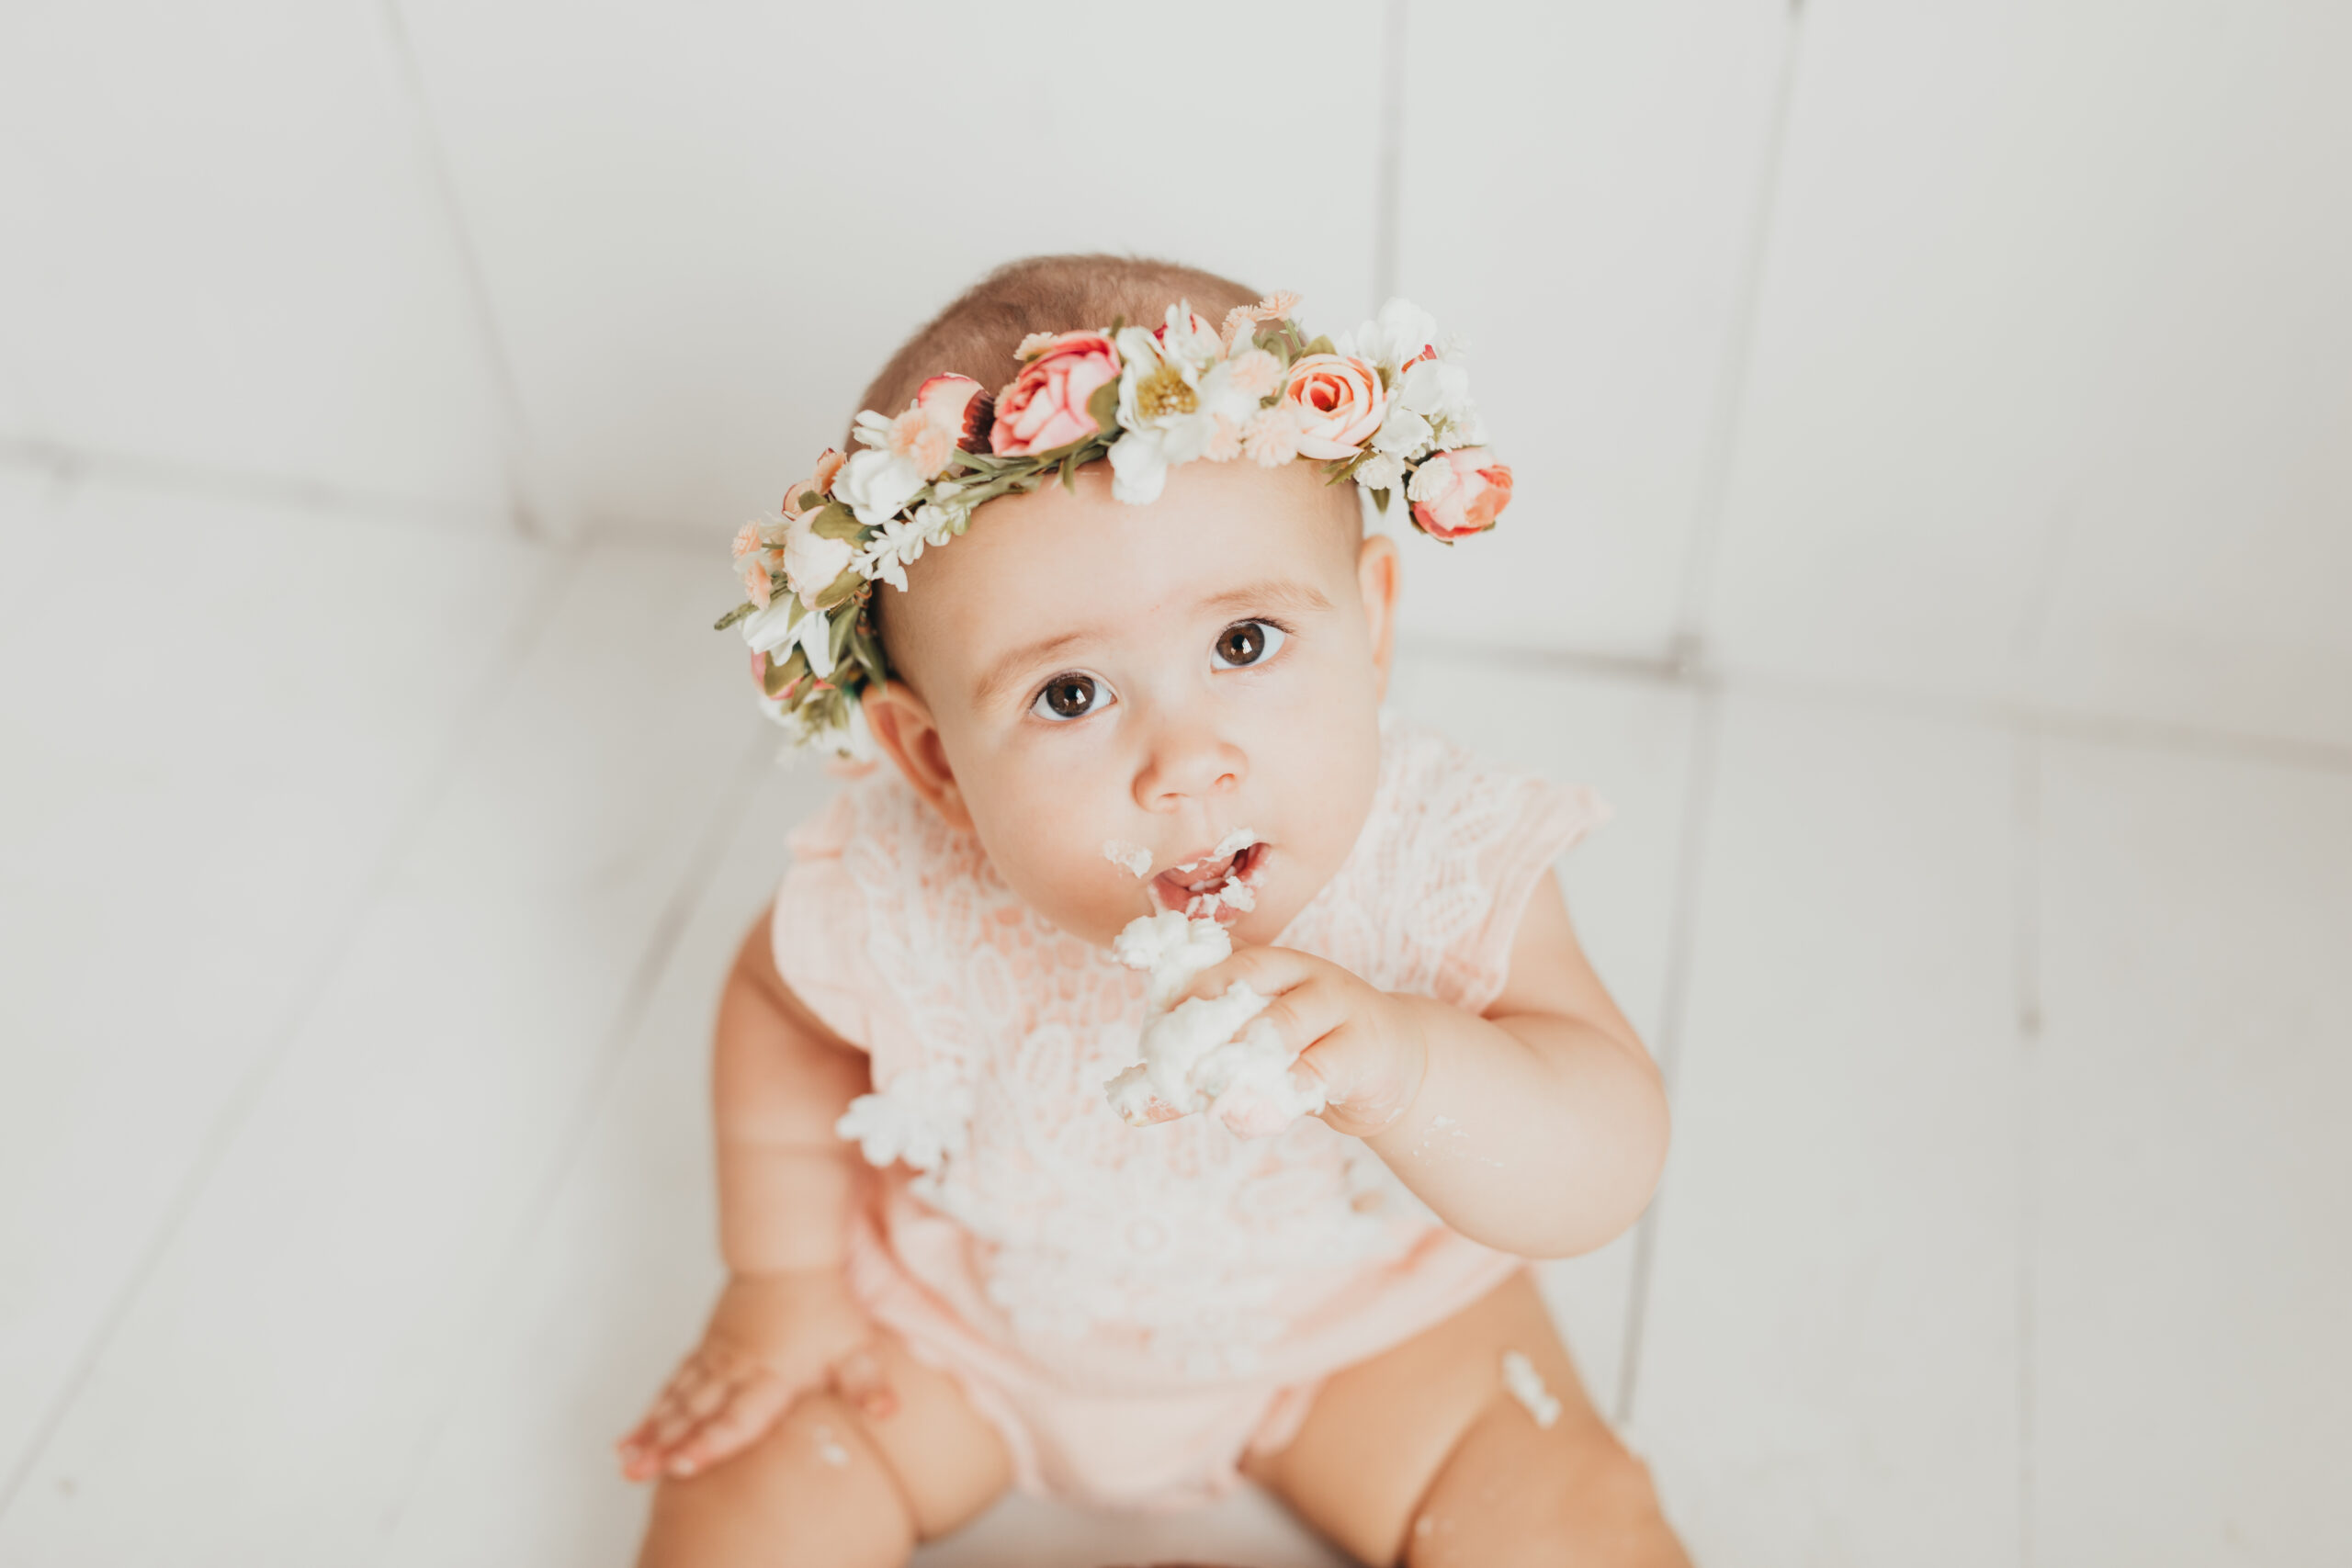 Baby looks up at camera while licking icing off her fingers from her houston cake smash photography session.